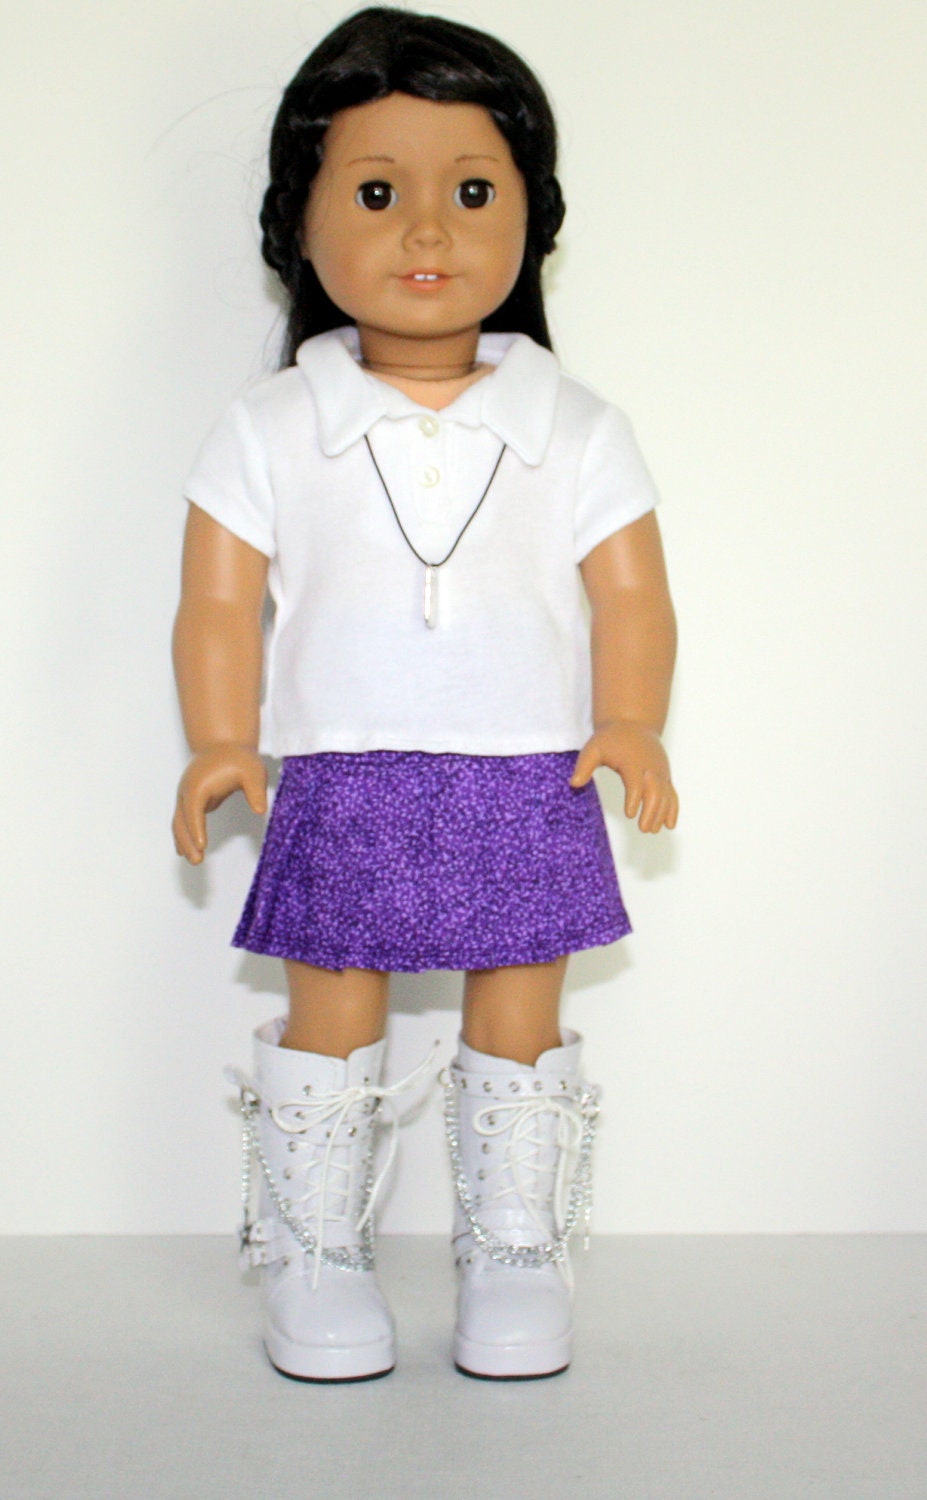 American Girl Doll White Knit Polo Shirt Purple Print Pleated Skirt Tall White Boots Charm Necklace - JessieAmerica